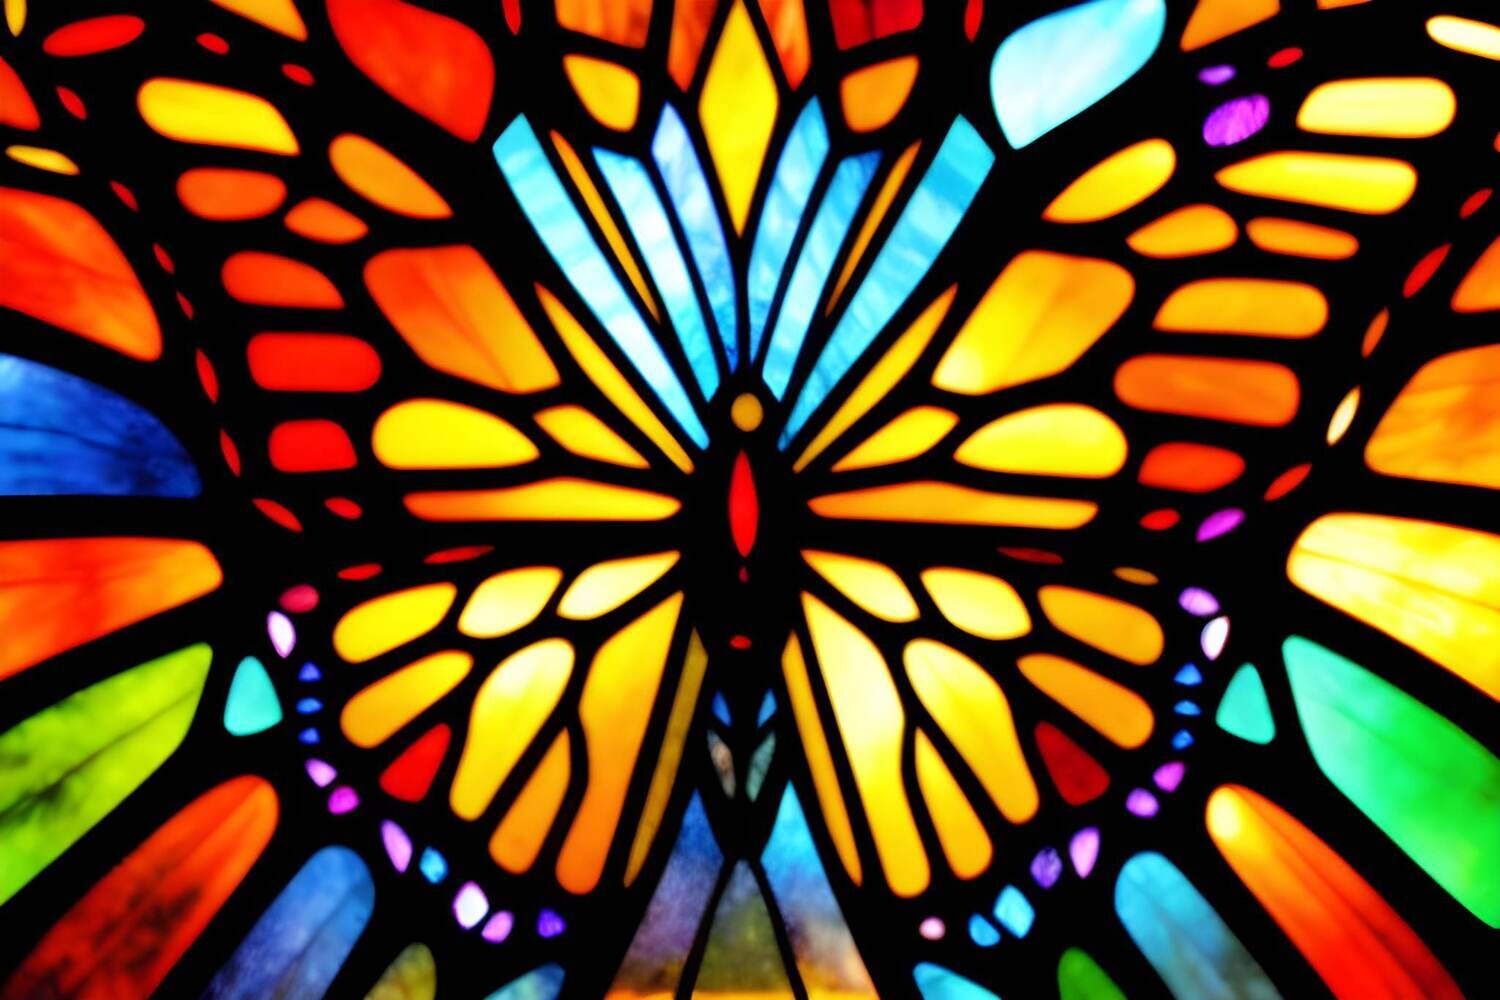 Stained Glass Butterfly 763 - 30 x 40cm Full Drill (Square) with AB drills - POURED GLUE - Diamond Painting Kit